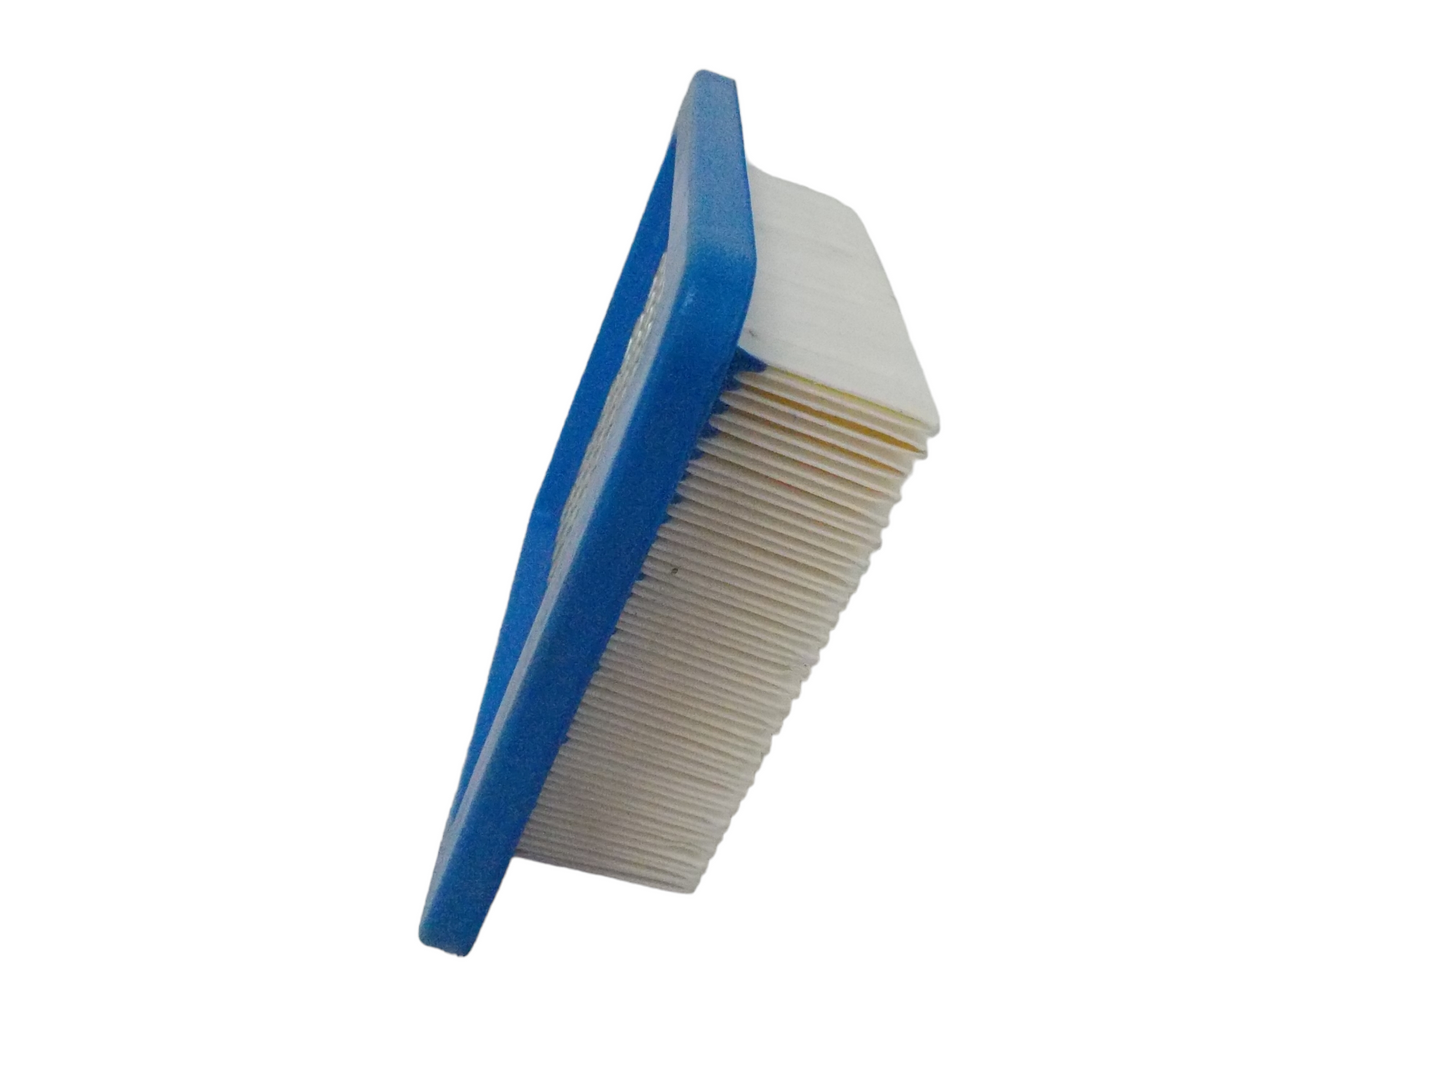 Proven Part Air Filter For 11029-2021 649351 102-747 13381